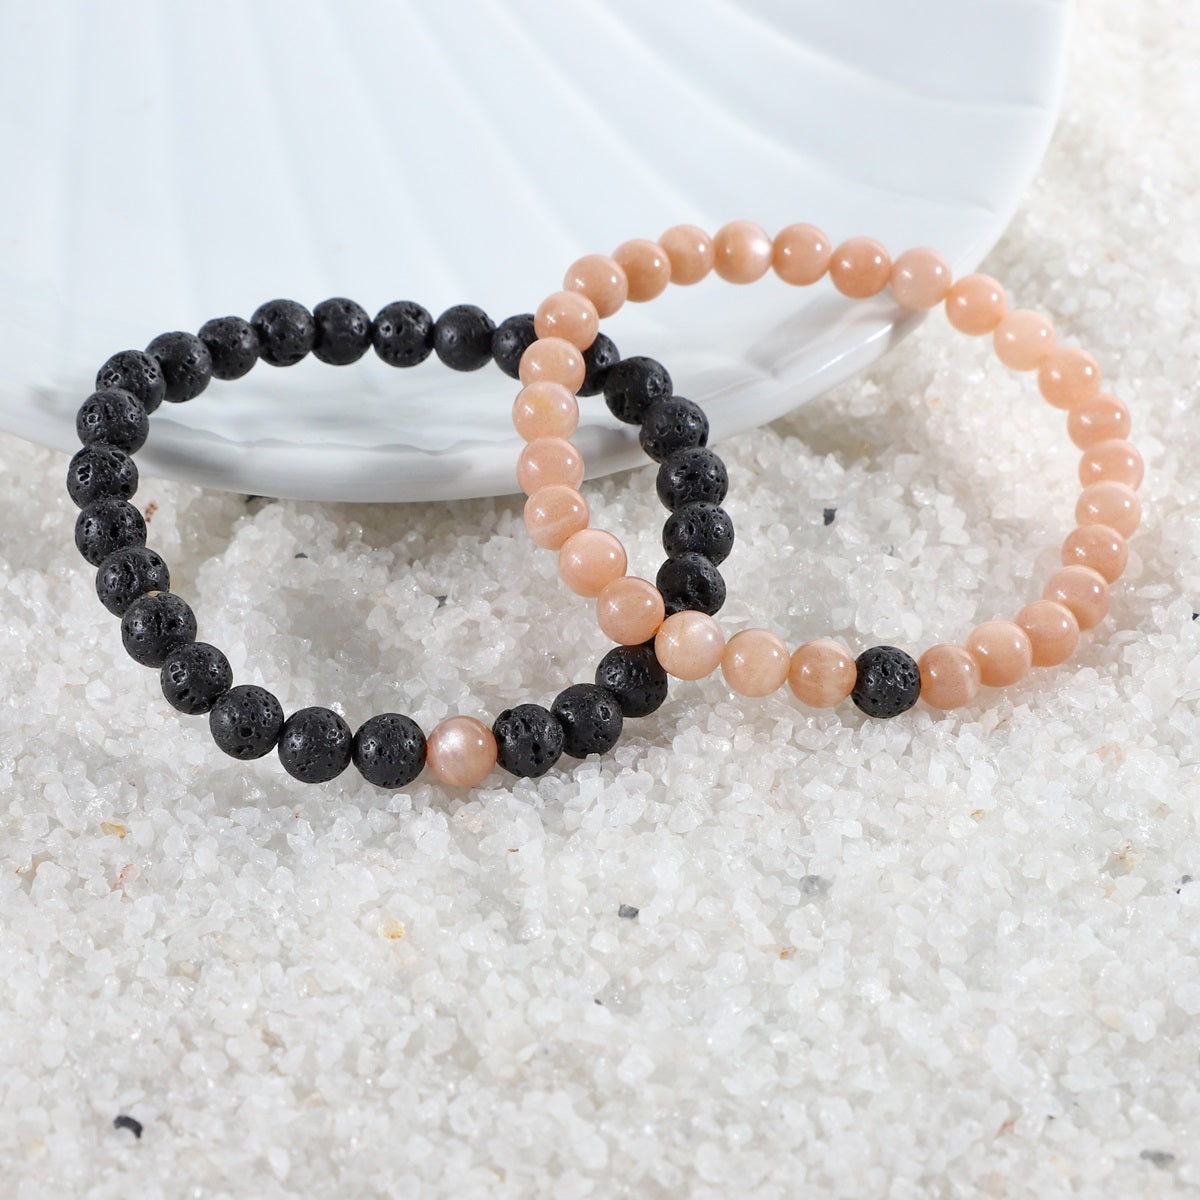 Various styling ideas for the Peach Moonstone and Lava Bracelet Combo, showcasing its versatile and fashionable appeal for everyday wear.